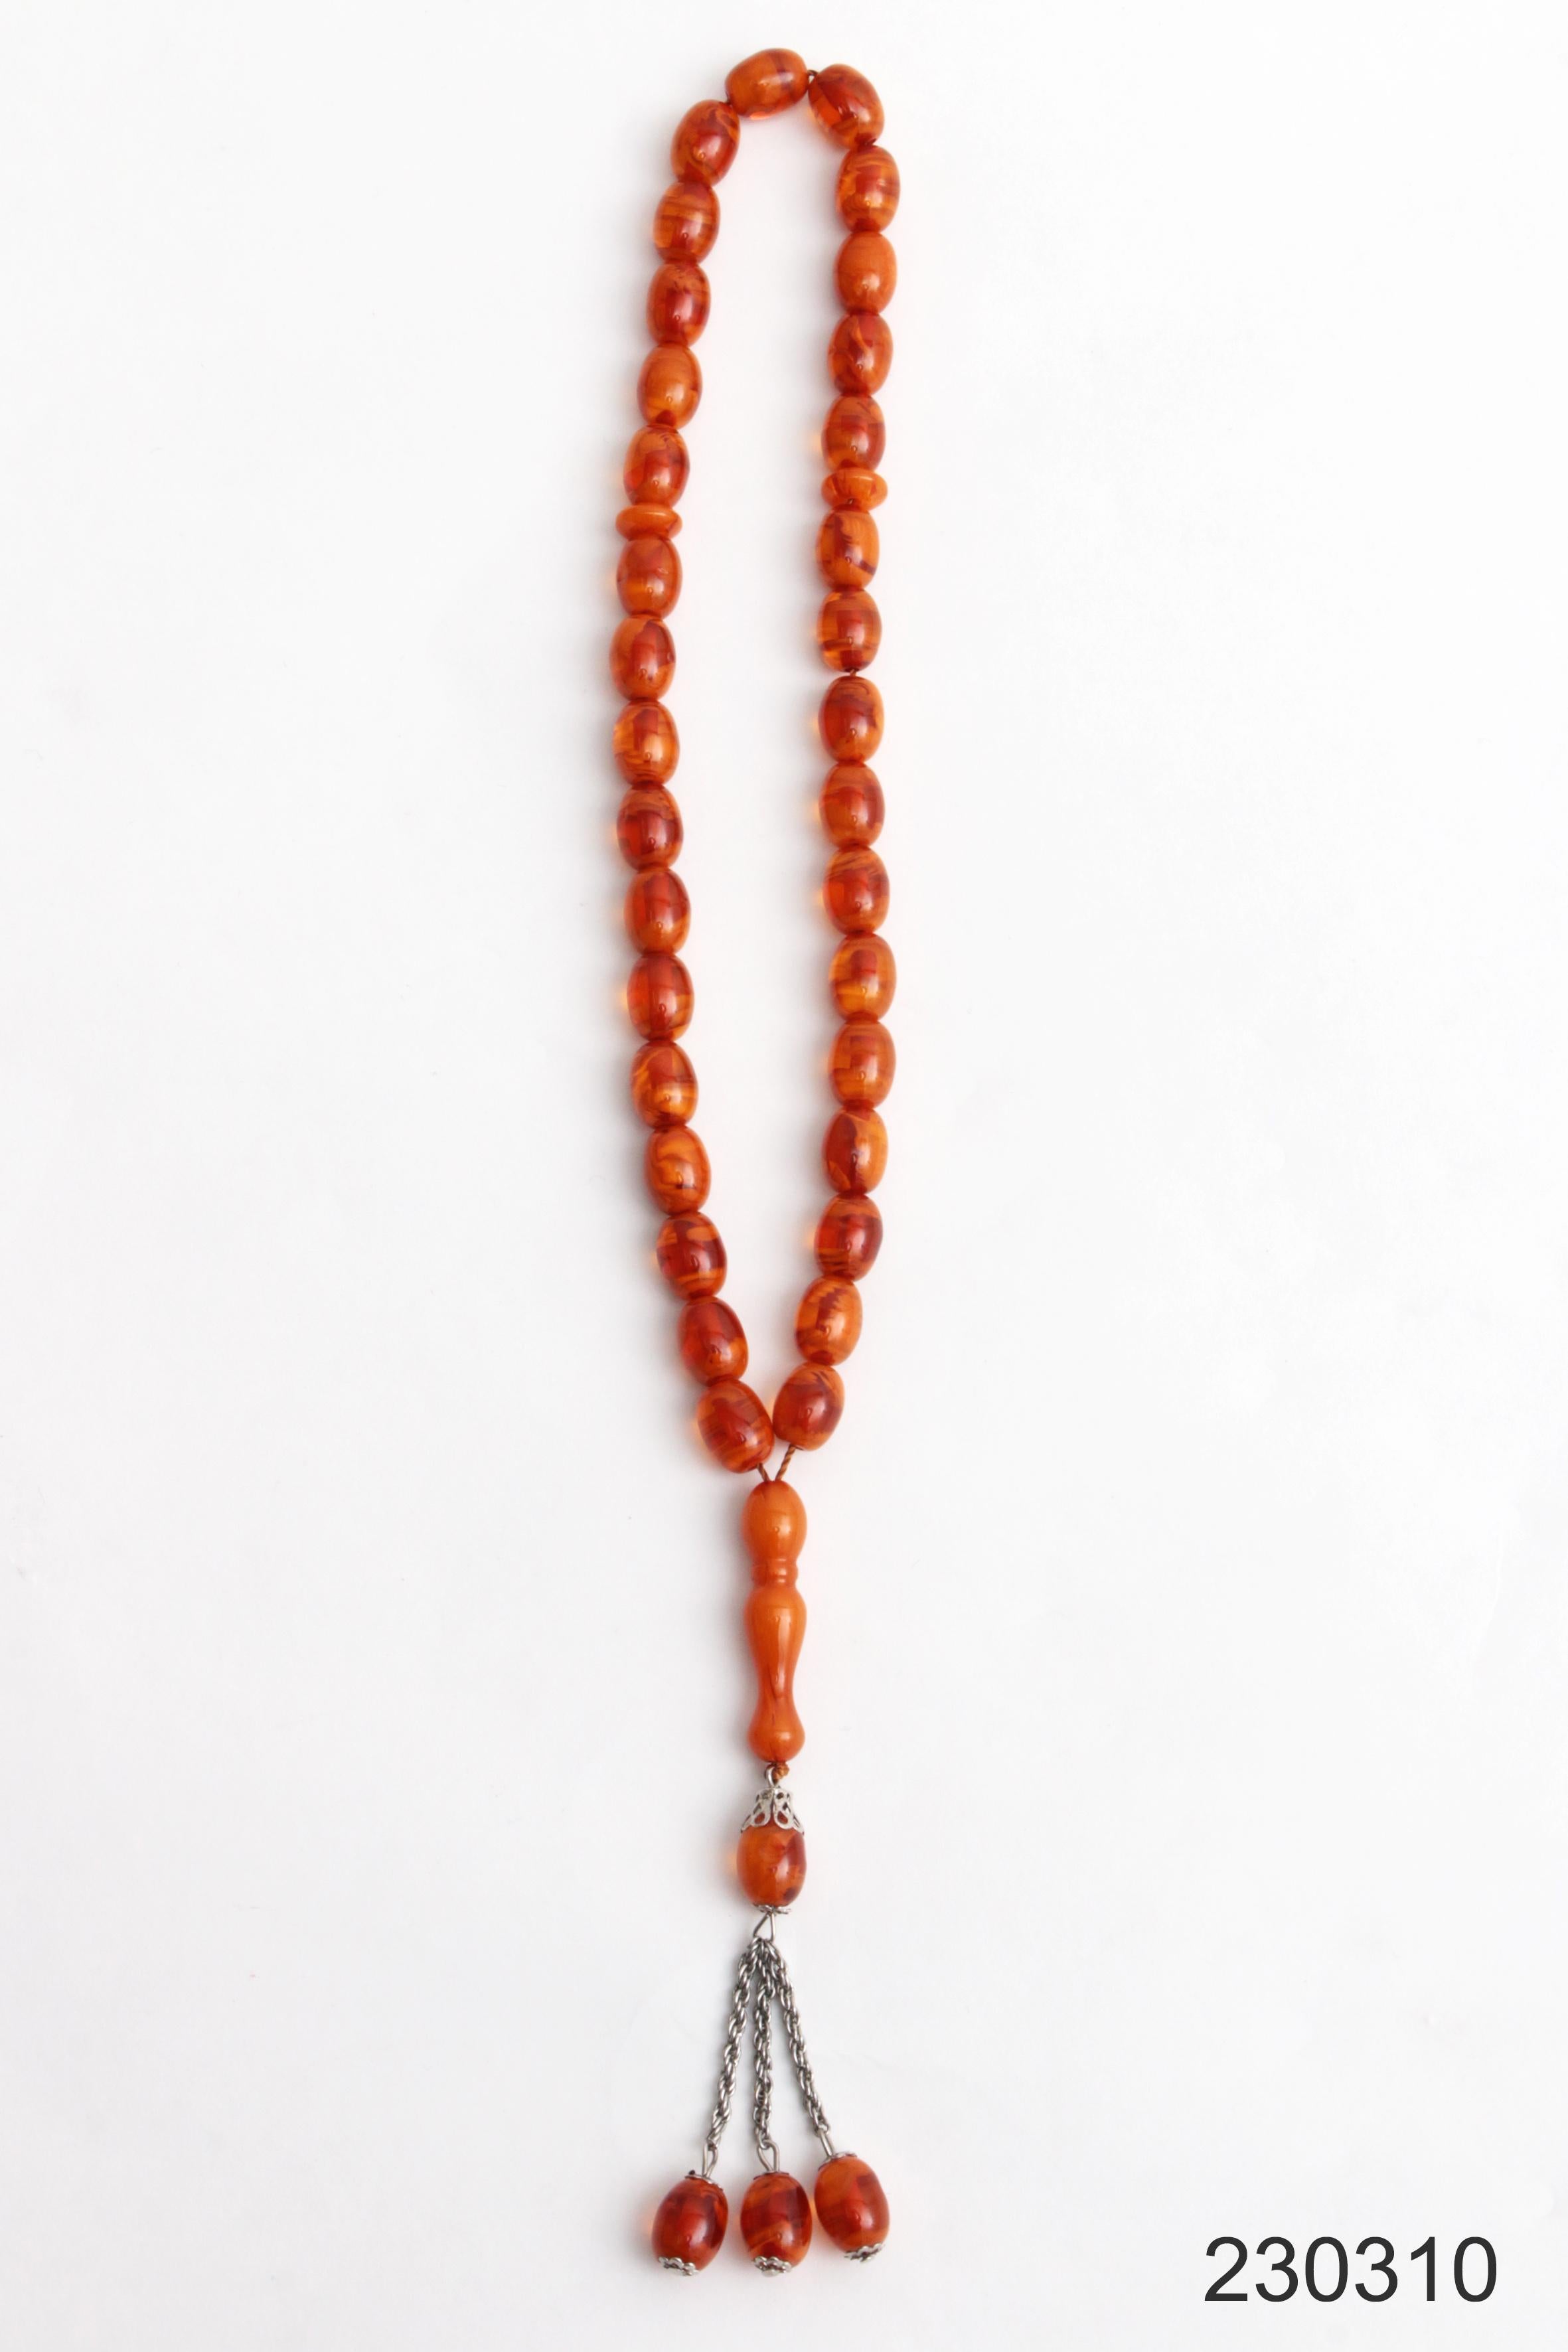 Beautiful Prayer Necklace Made of Amber from the 1960s For Sale 6